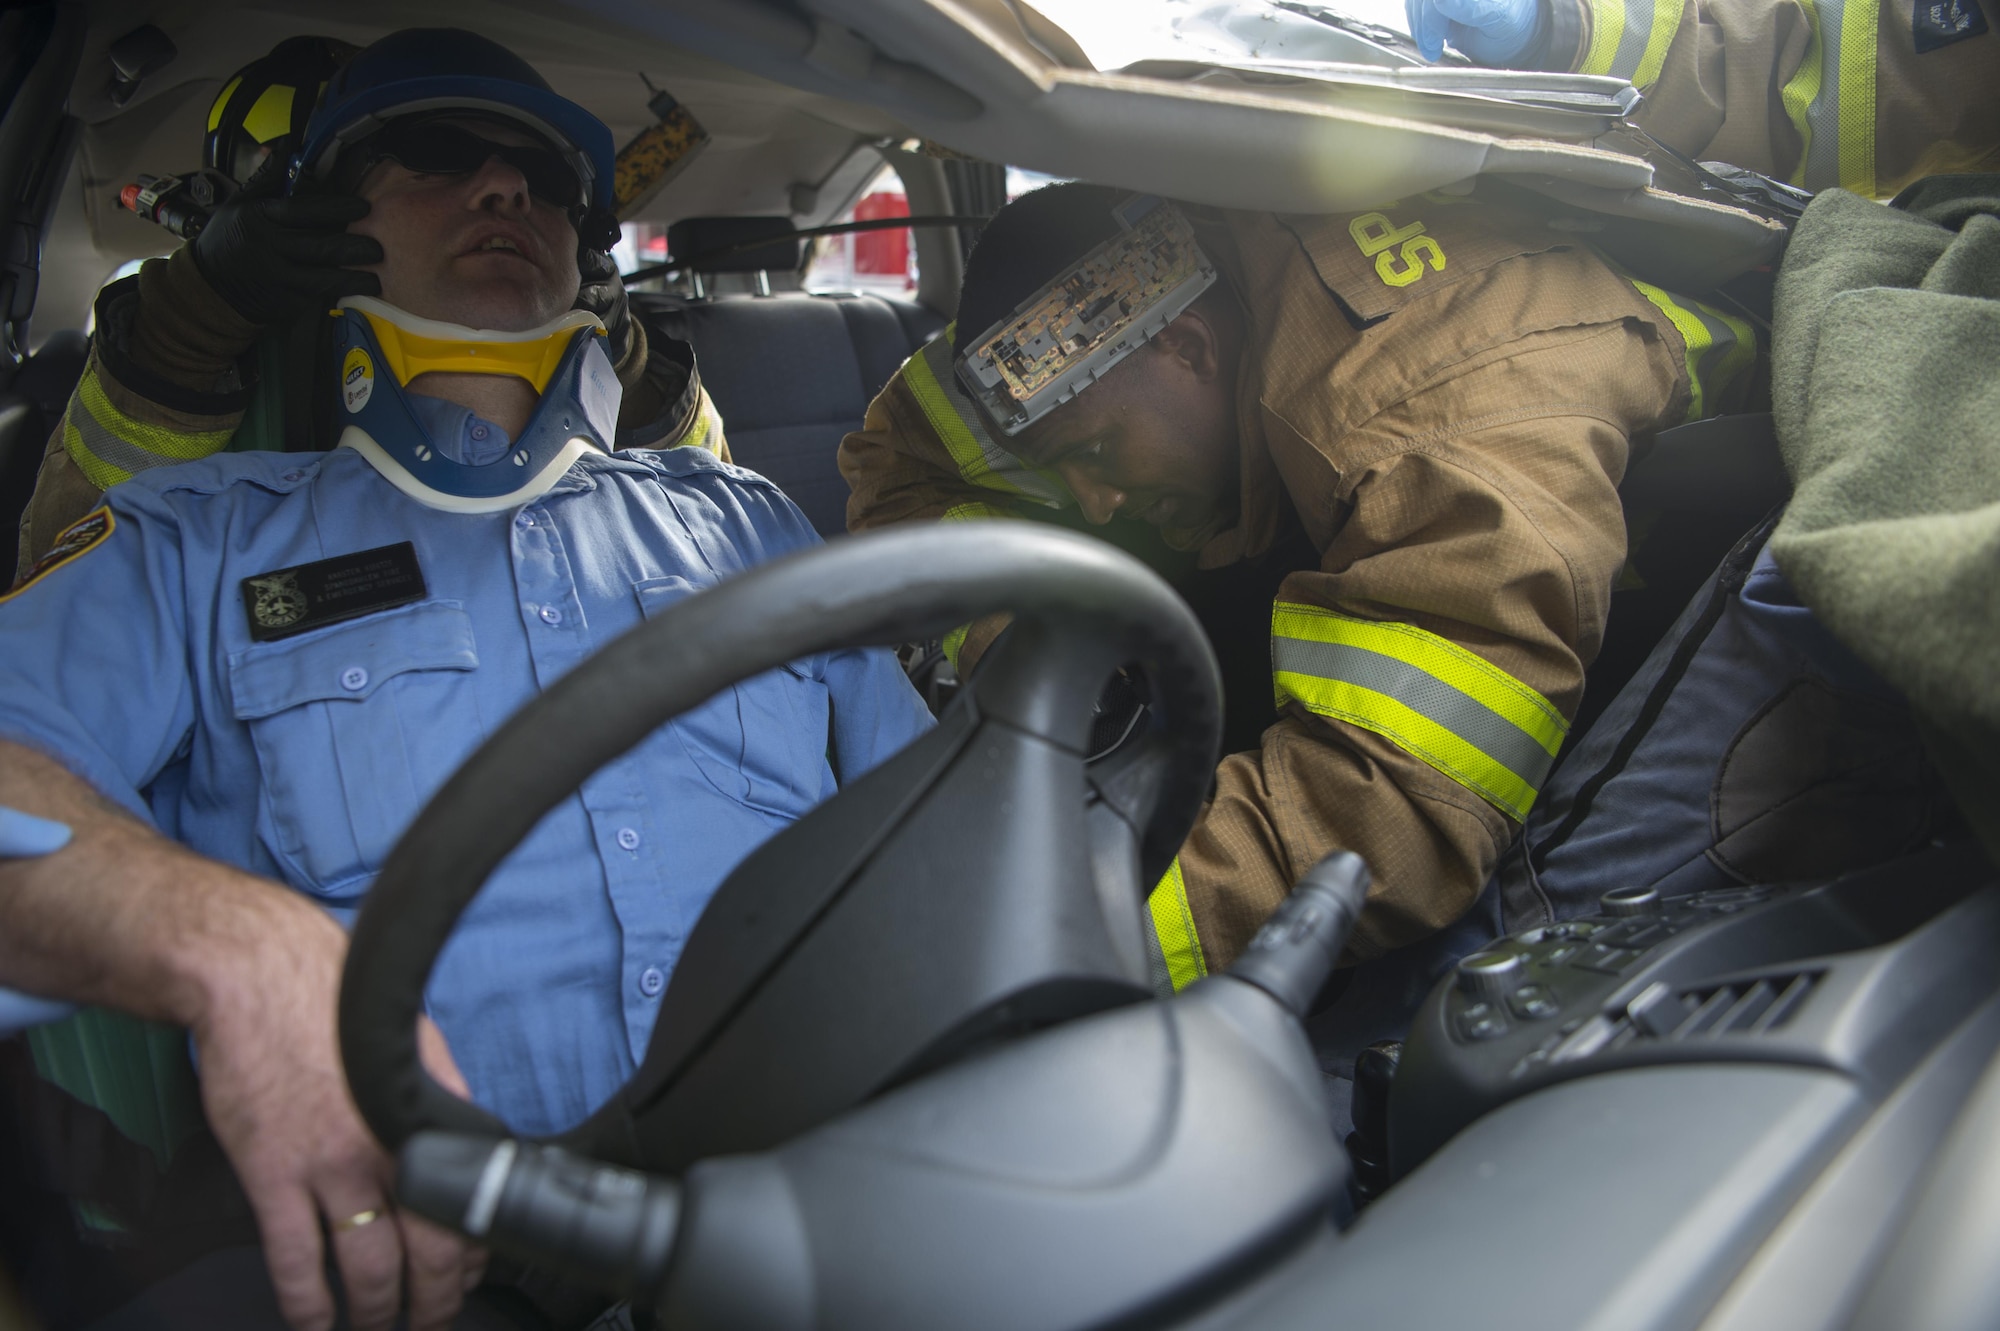 U.S. Air Force Senior Airman Robert Jones, 52nd Civil Engineer Squadron firefighter, extracts Karsten Kurtze, 52nd CES Spangdahlem fire and emergency services, during a simulated vehicle accident on Spangdahlem Air Base, Germany, Oct. 19, 2017. Airmen from the 52nd CES and 52nd Medical Operations Support Squadron train together to practice and execute skills needed for real world scenarios. (U.S. Air Force photo by Senior Airman Dawn M. Weber)